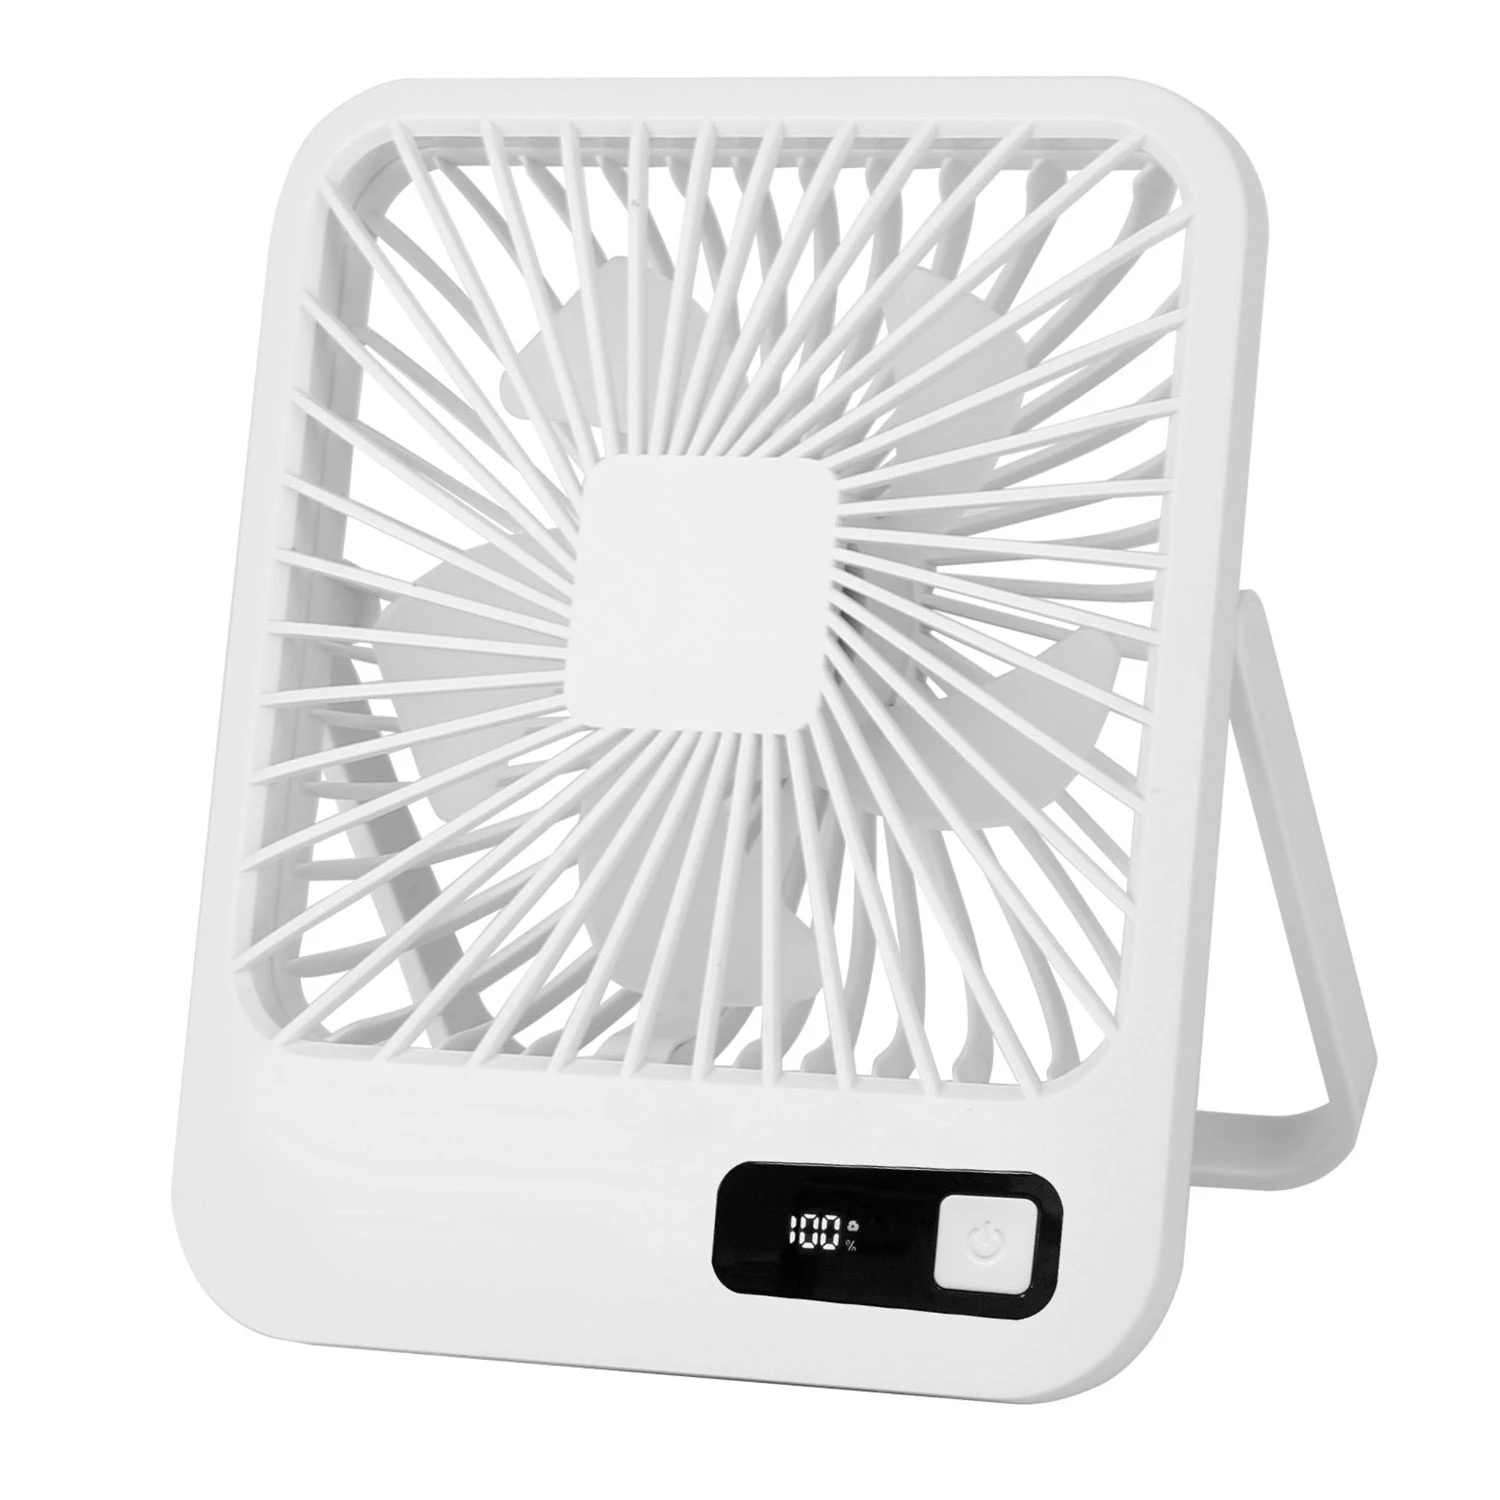 Portable Rechargeable Mini Fan: LCD Display, Adjustable Speed, Strong Airflow